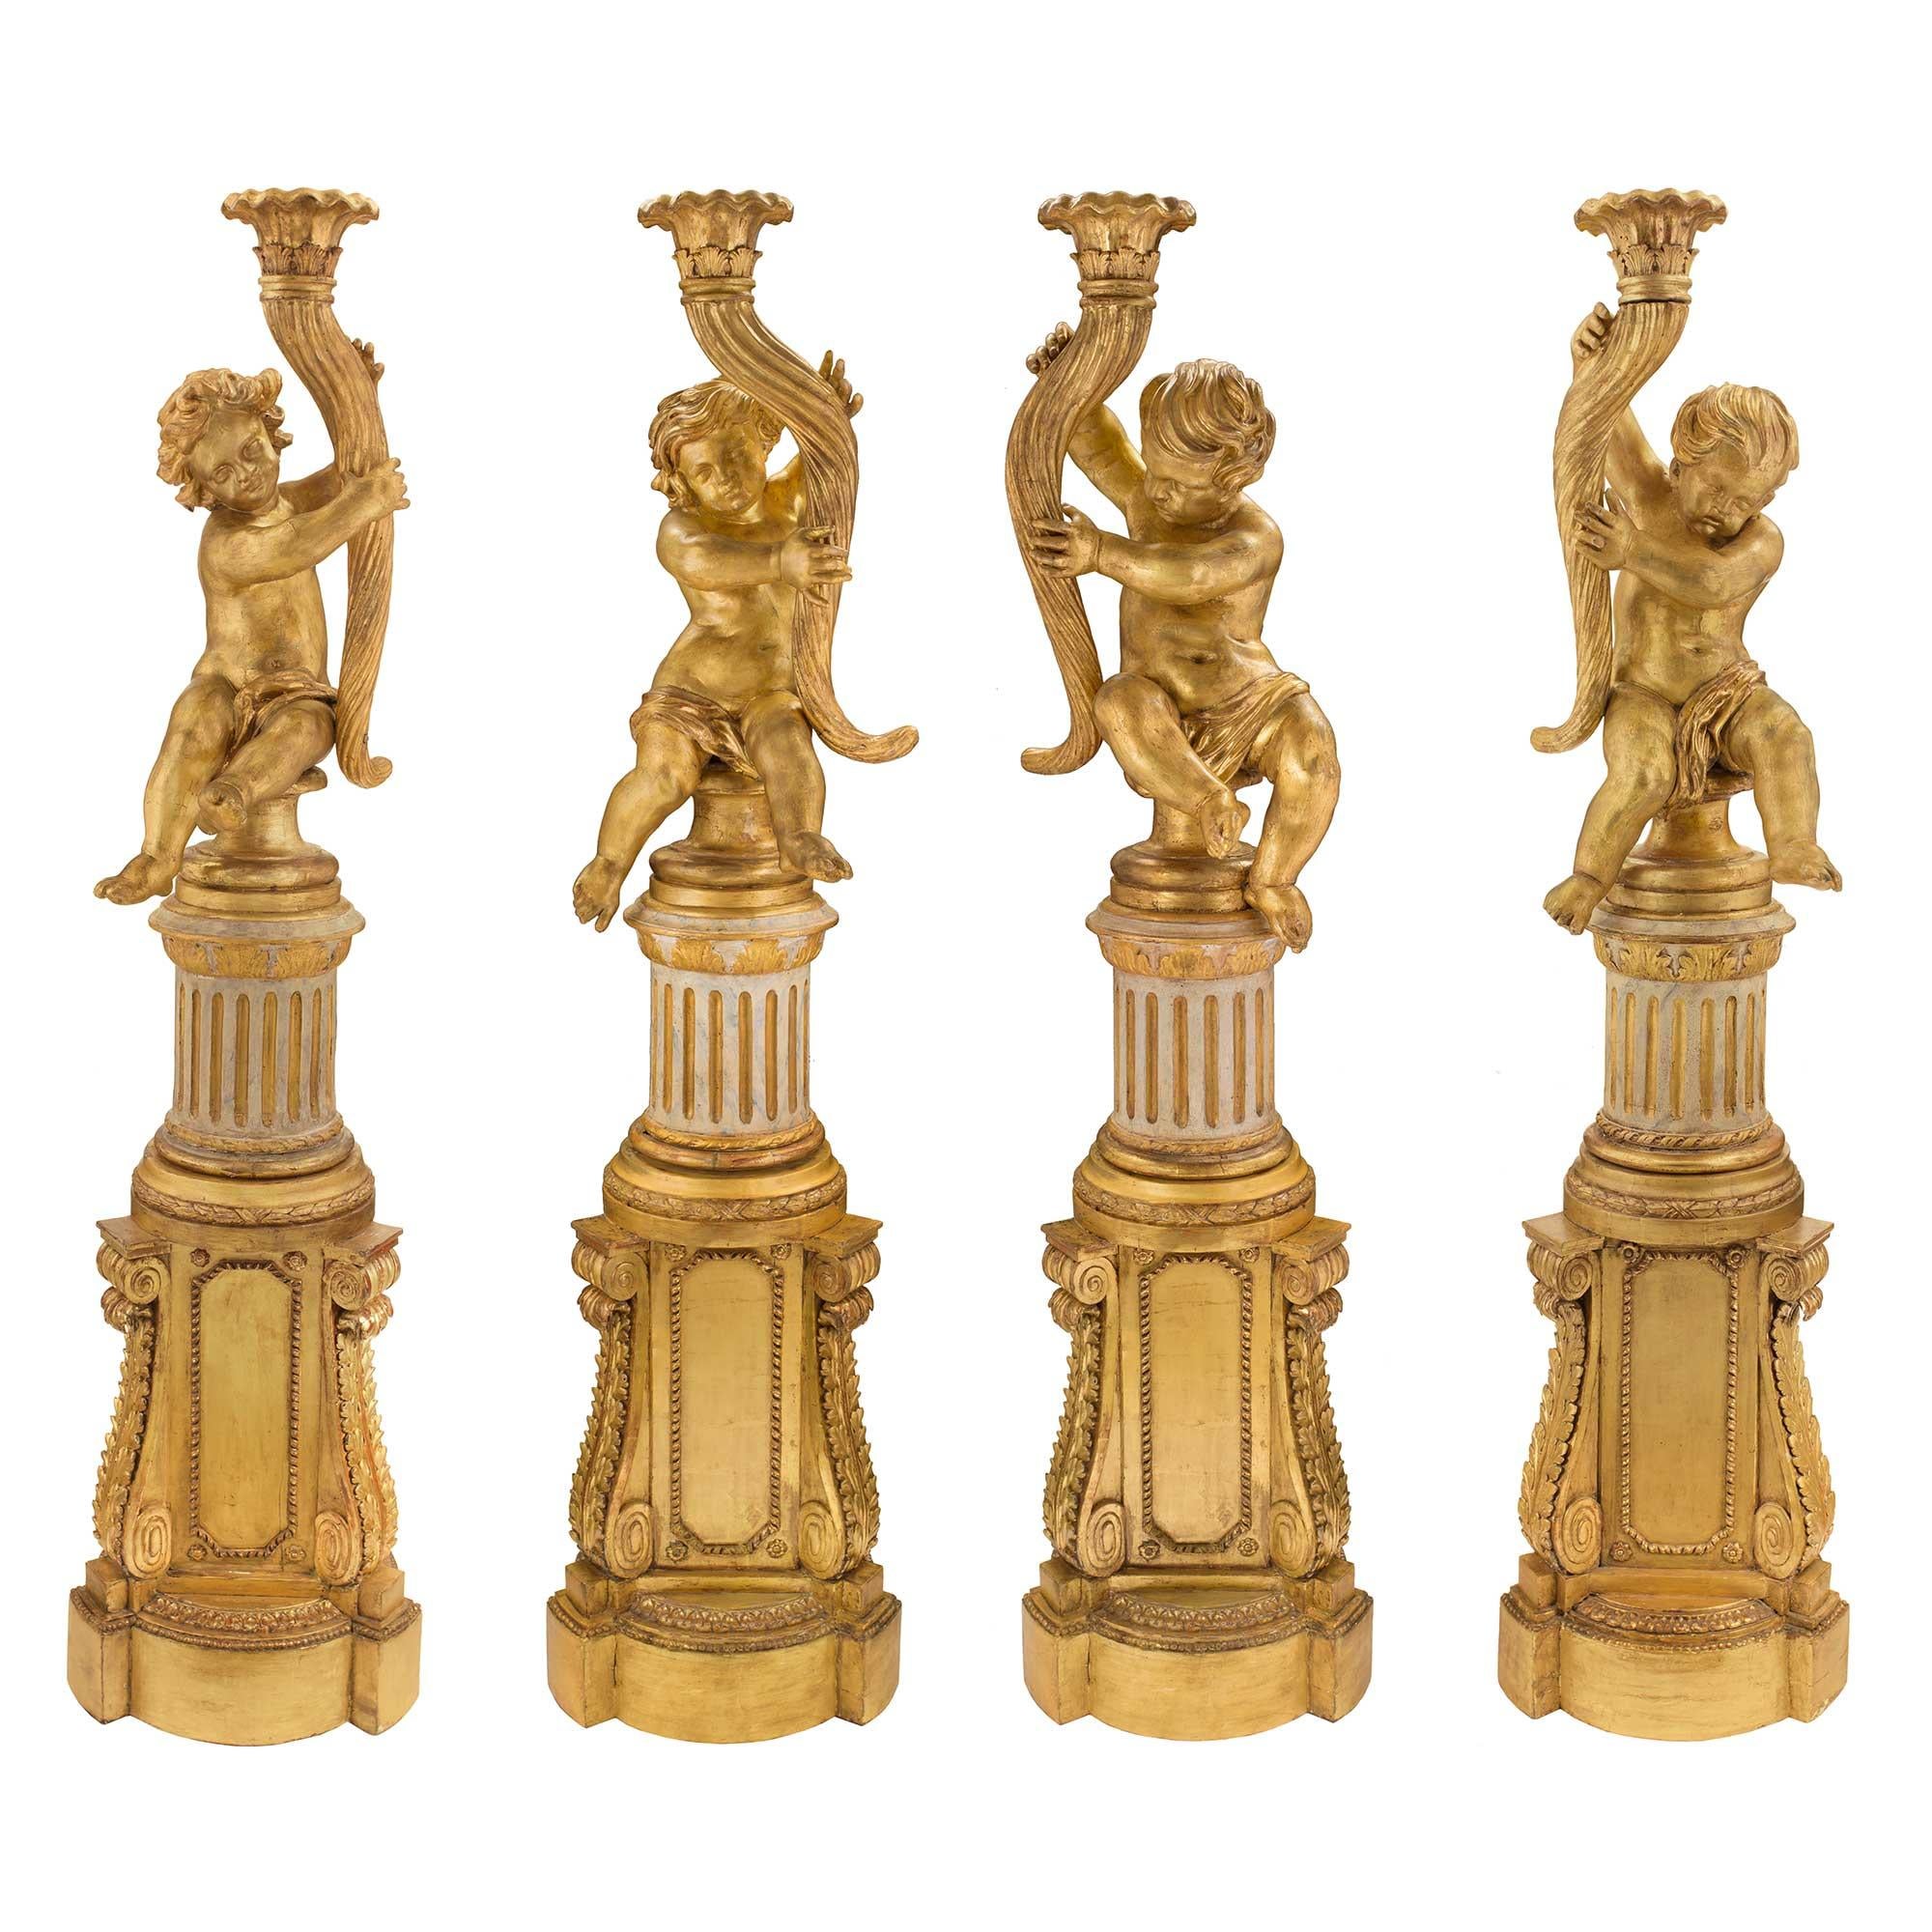 A sensational and extremely decorative complete set of four Italian 18th century Louis XVI period patinated off white and giltwood cherub Torchières. Each is raised by impressive gilt pedestals decorated by large richly carved acanthus leaves,